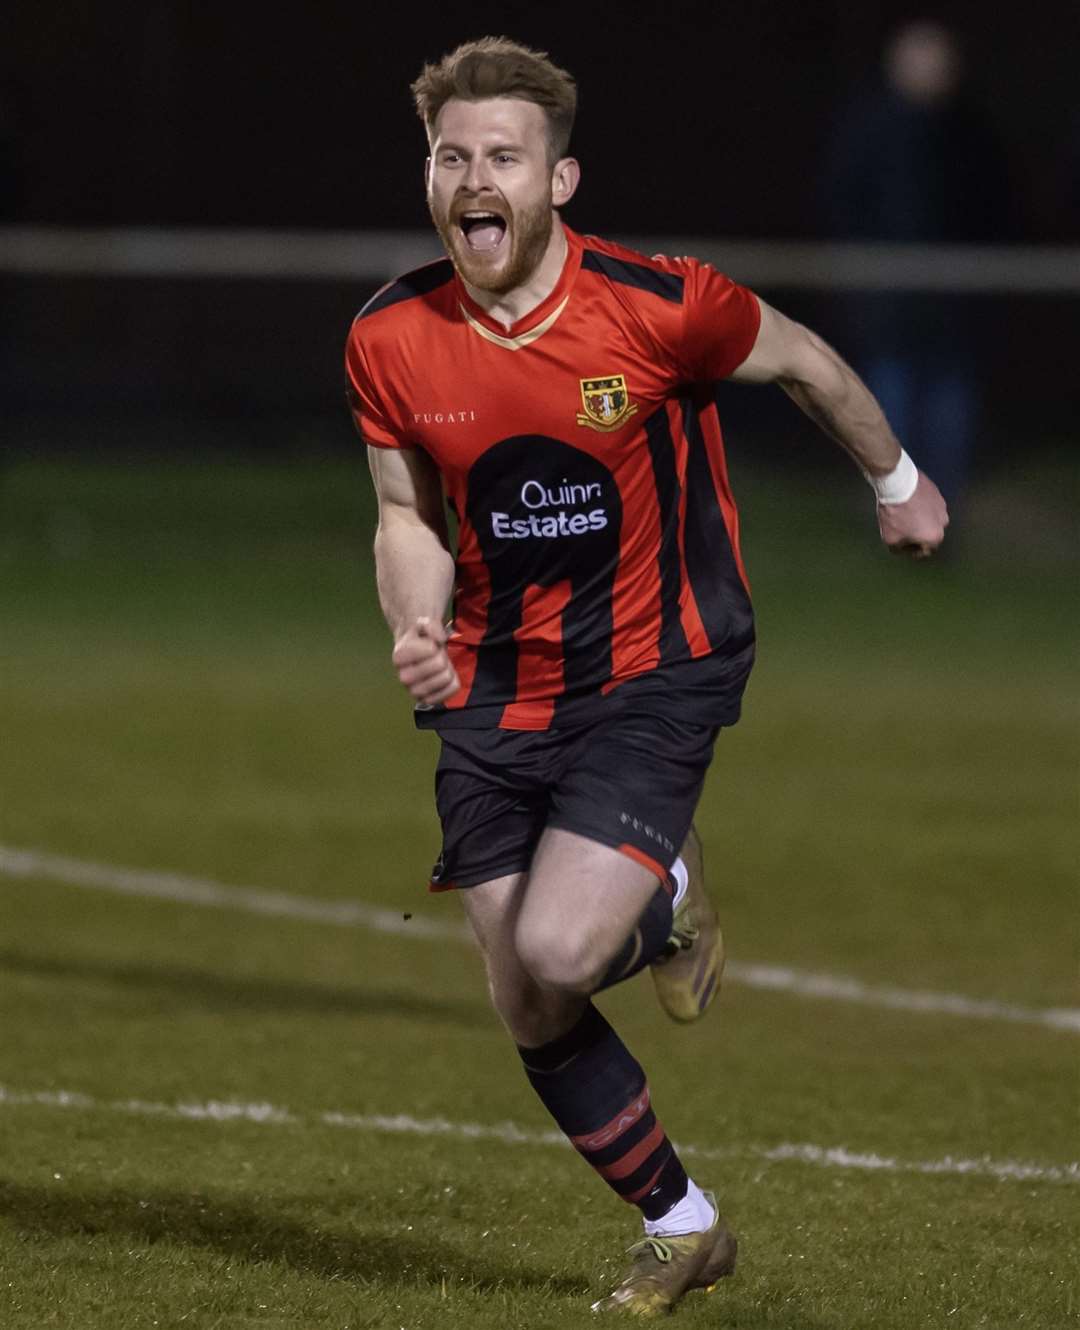 Correy Davidson celebrates after putting Sittingbourne 2-1 up against VCD. against Picture: Ian Scammell